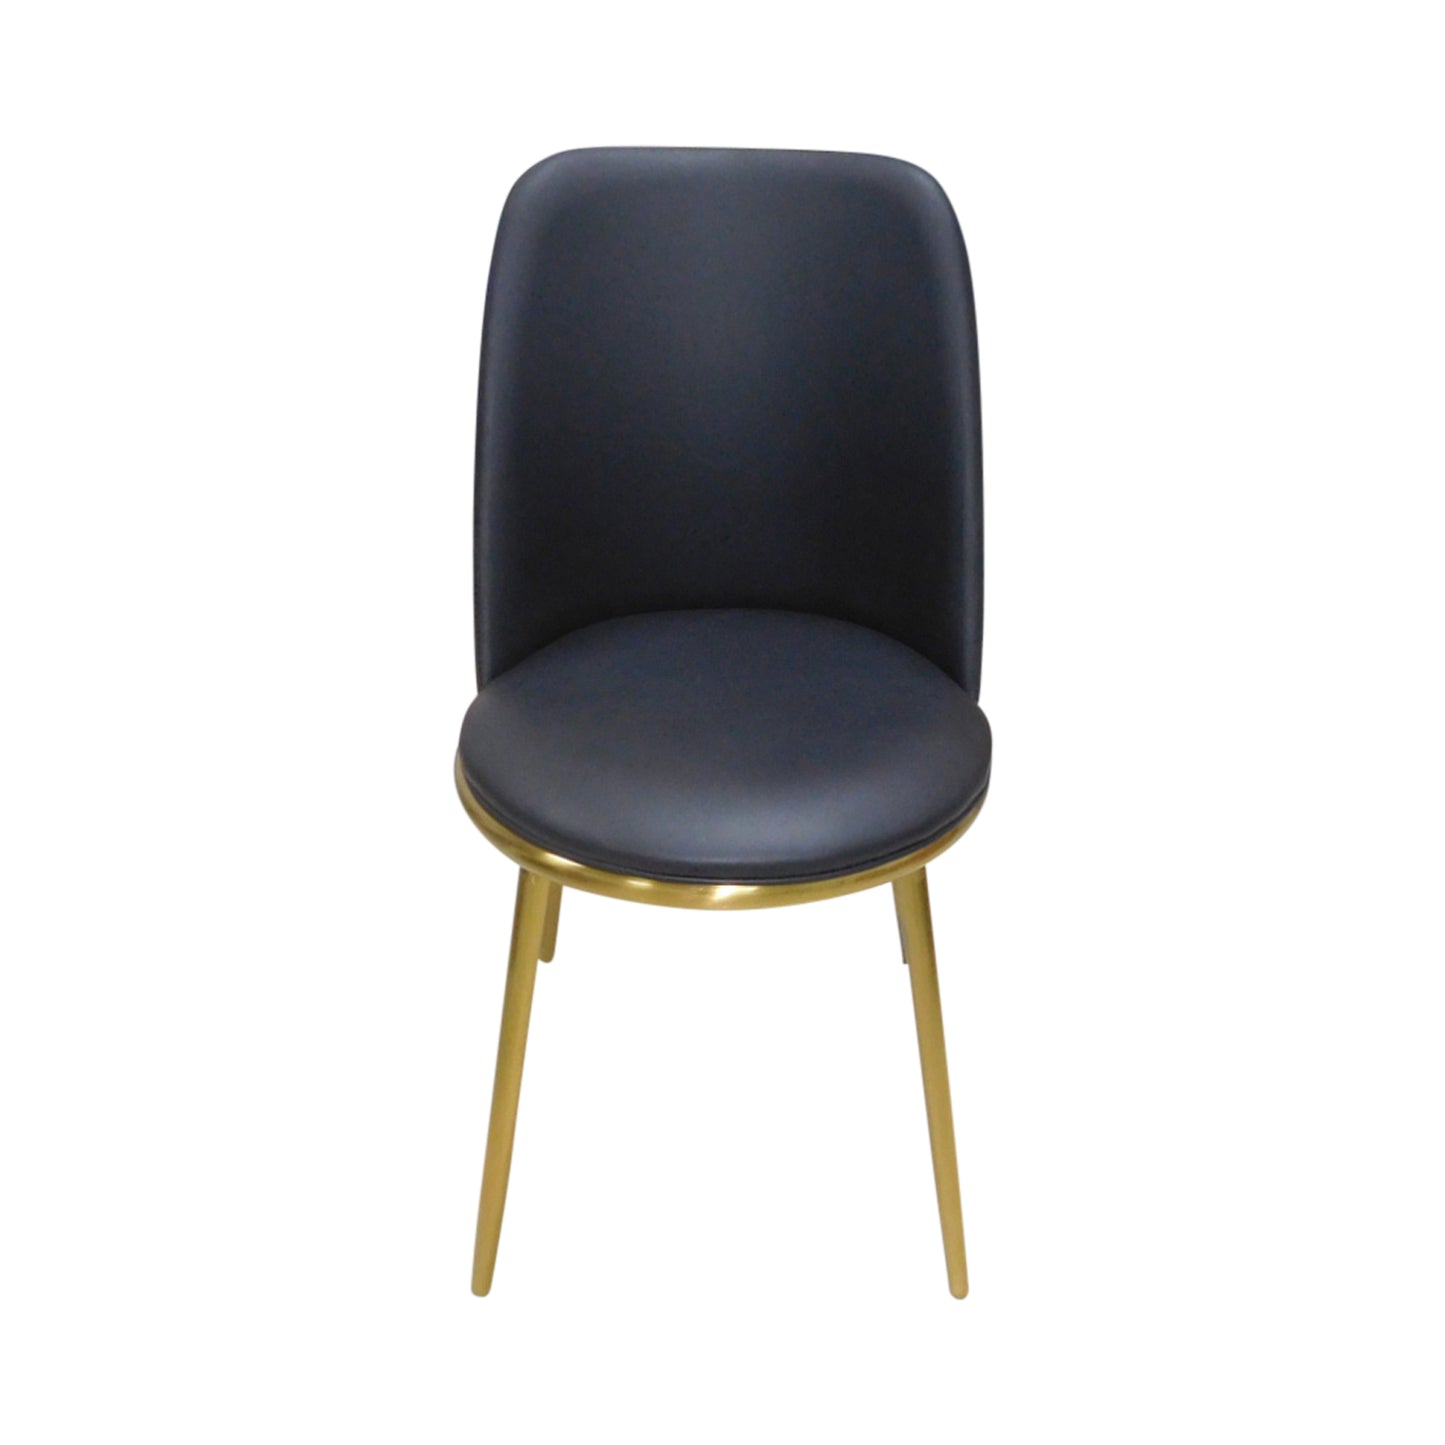 6X Dining Chairs Black Leatherette Seat Golden Frame Tripod Legs Stainless Steel Firm Support